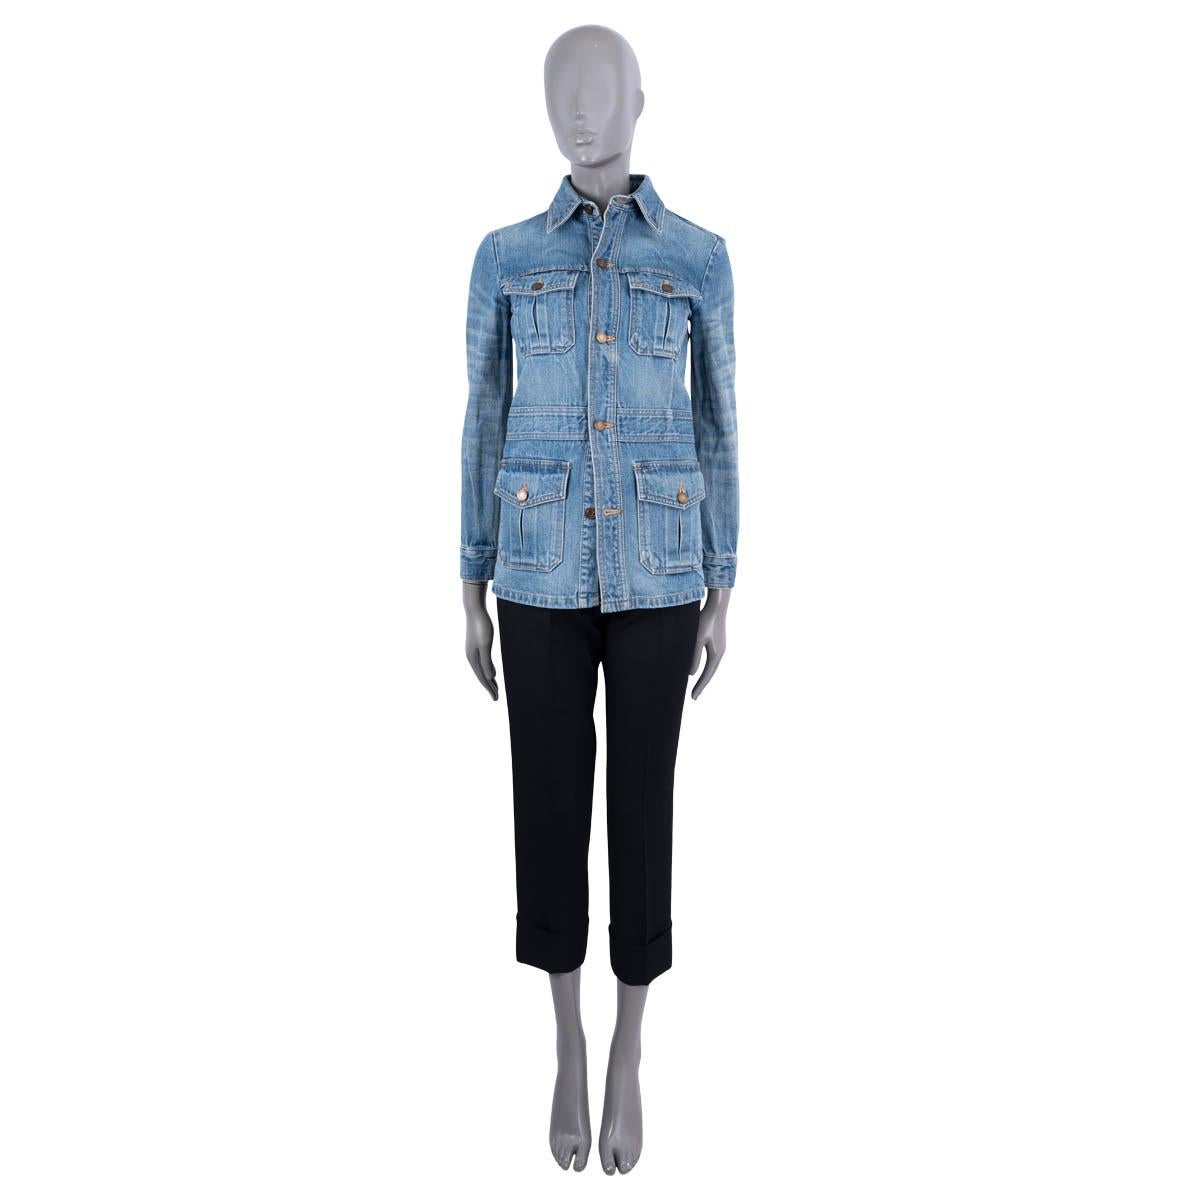 100% authentic Saint Laurent saharan short denim jacket in blue cotton (100%). Features four flap pockets on the front. Closes on the front with a bronze tone buttons. Cuffs close with bronze tone buttons. Unlined. Has been worn and is in excellent